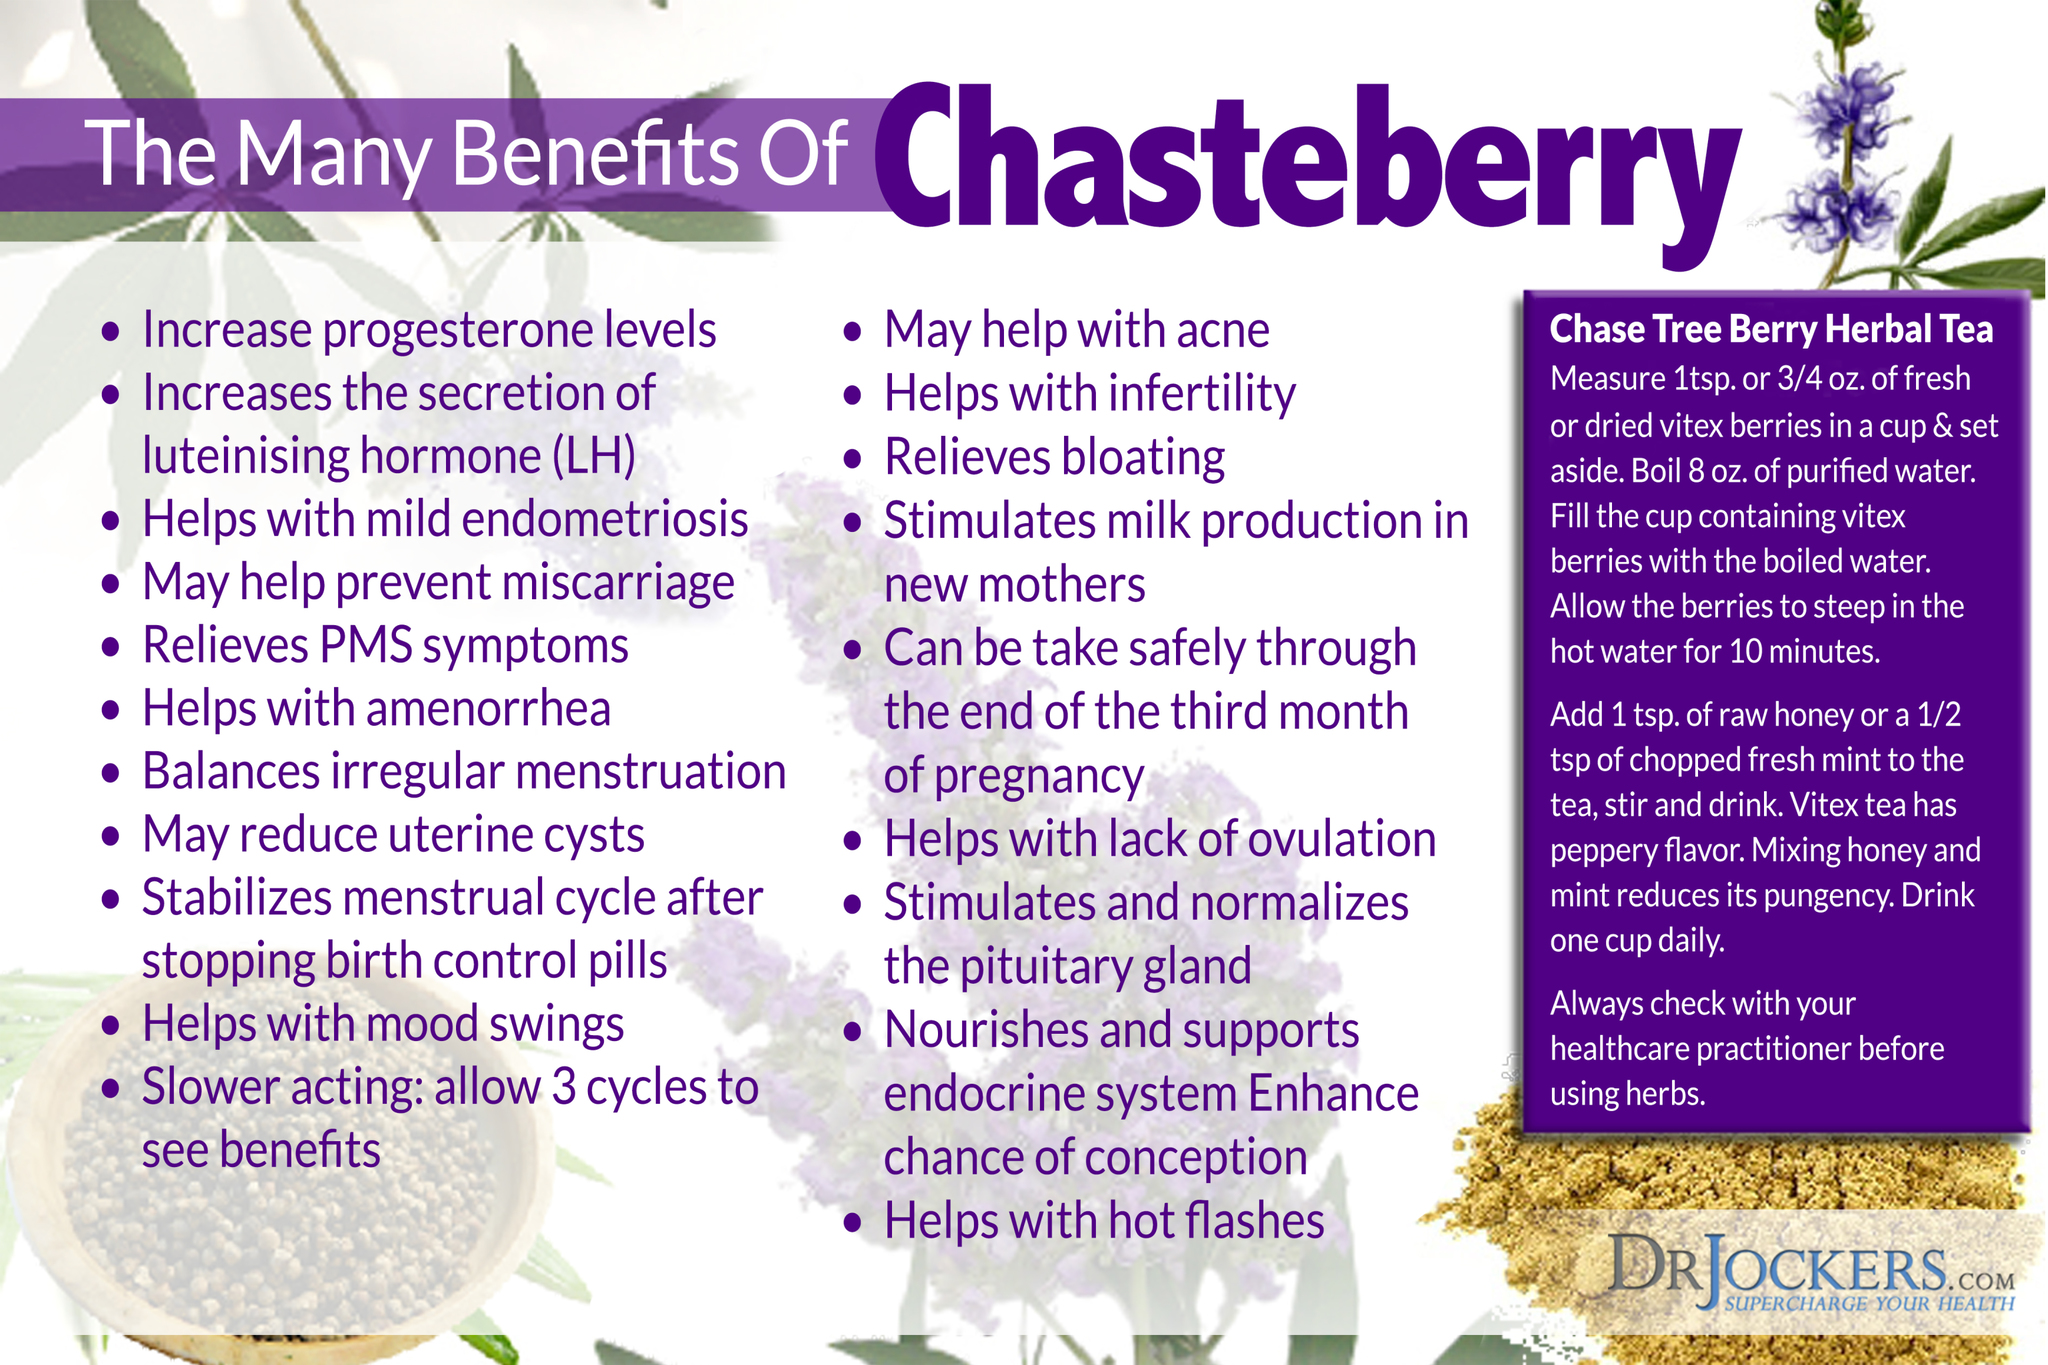 Chasteberry, 6 Benefits Of Chasteberry For PMS